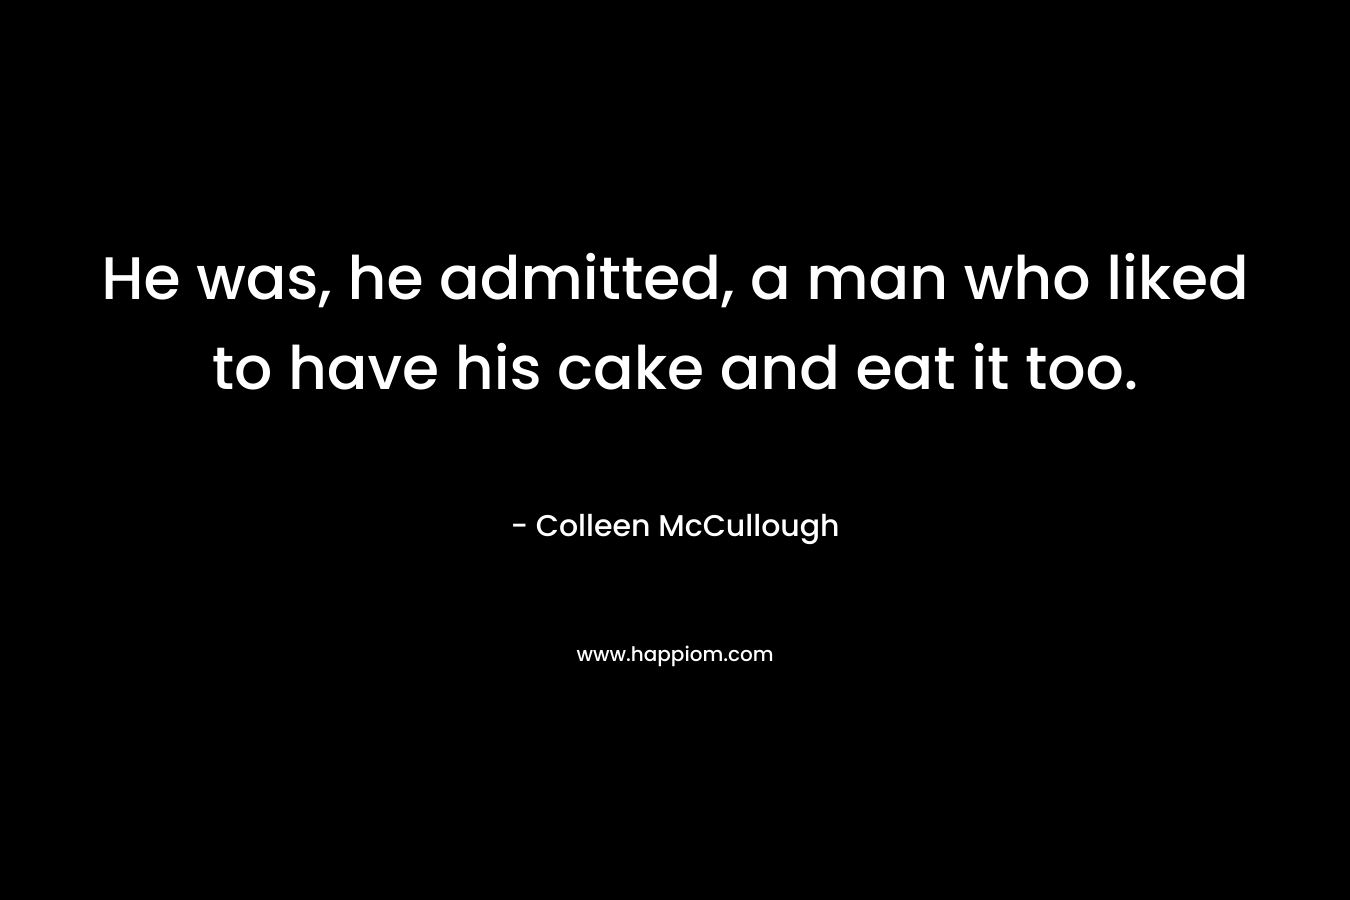 He was, he admitted, a man who liked to have his cake and eat it too.